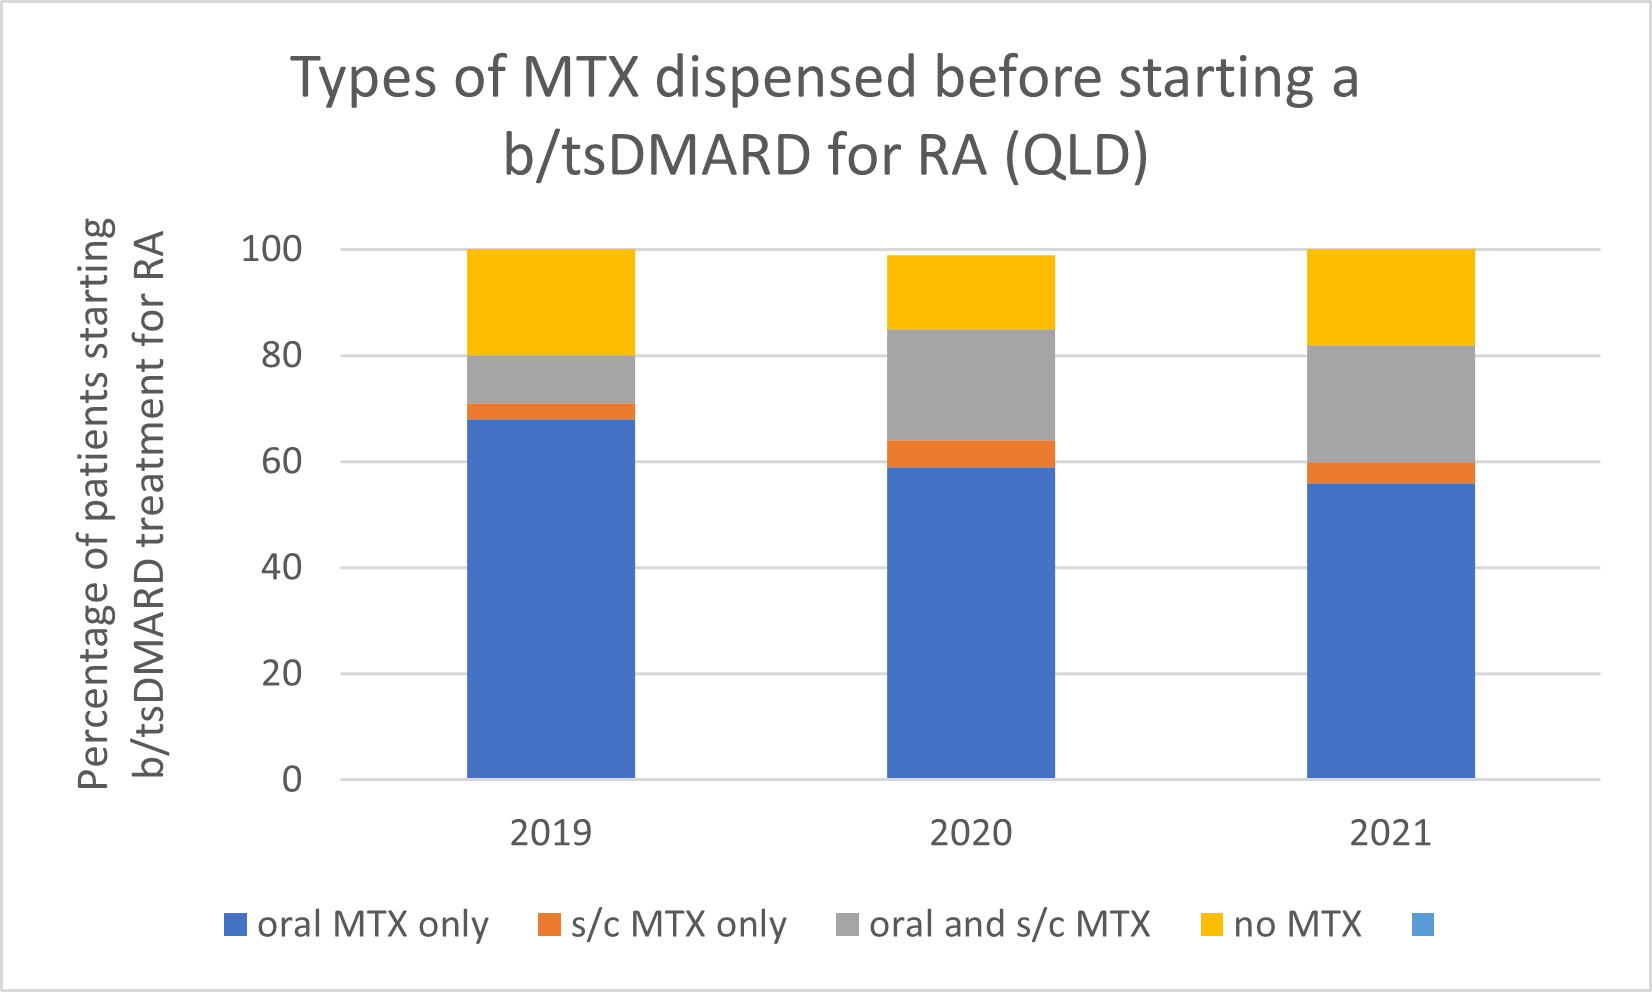 Types of methotrexate used before starting a b/tsDMARD for RA, 2019–2021 (QLD)